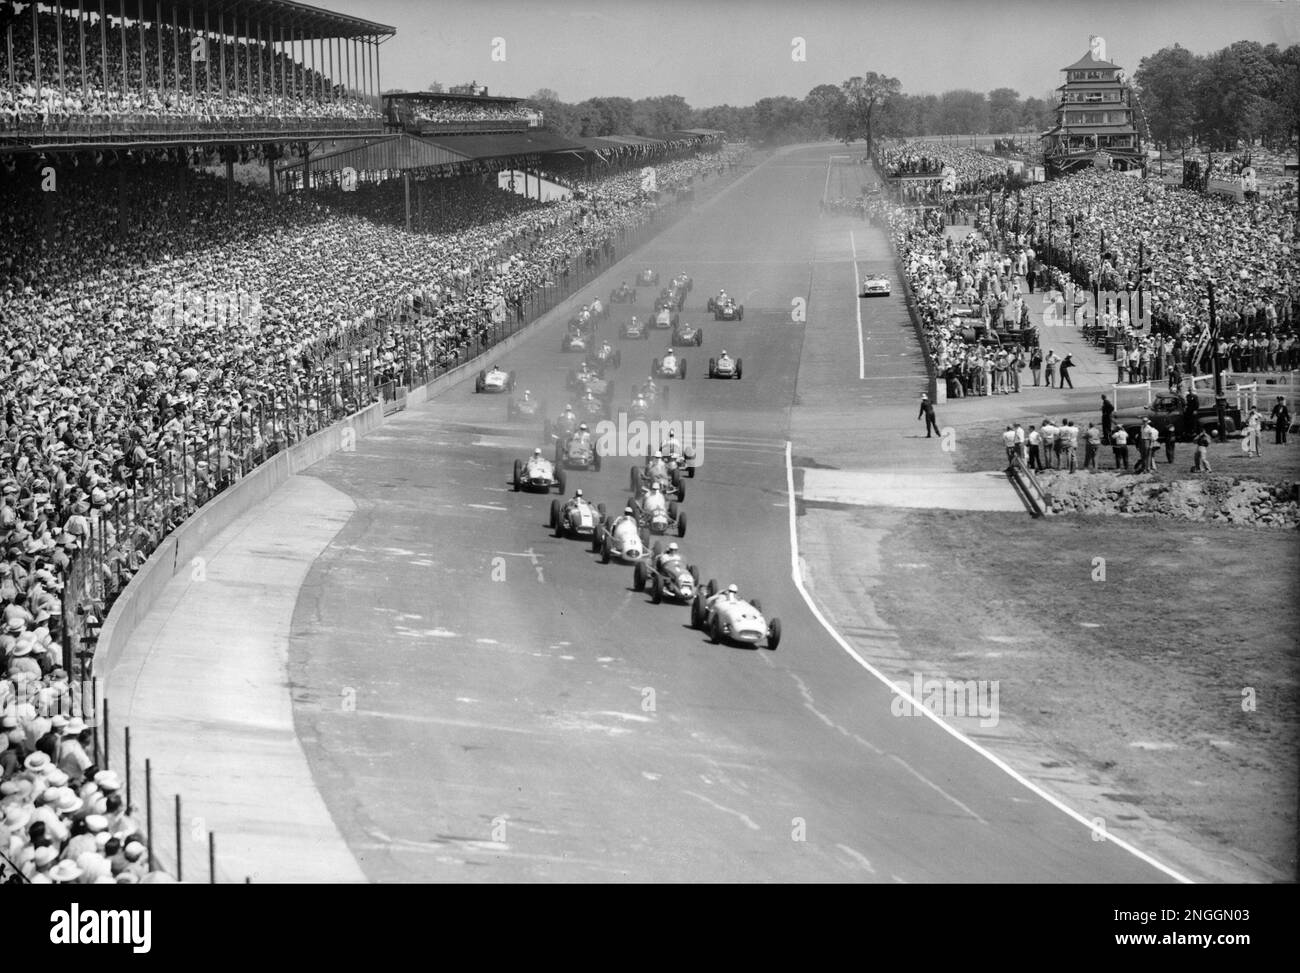 https://c8.alamy.com/comp/2NGGN03/thirty-three-competitors-in-the-indianapolis-500-mile-race-approach-the-first-curve-of-the-indianapolis-motor-speedway-in-the-38th-running-in-indianapolis-ind-may-31-1954-pole-winner-jack-mcgrath-right-driving-a-hinkle-special-is-leading-bill-vukovich-went-on-to-win-the-indy-500-at-an-average-speed-of-13084-miles-per-hour-ap-photo-2NGGN03.jpg